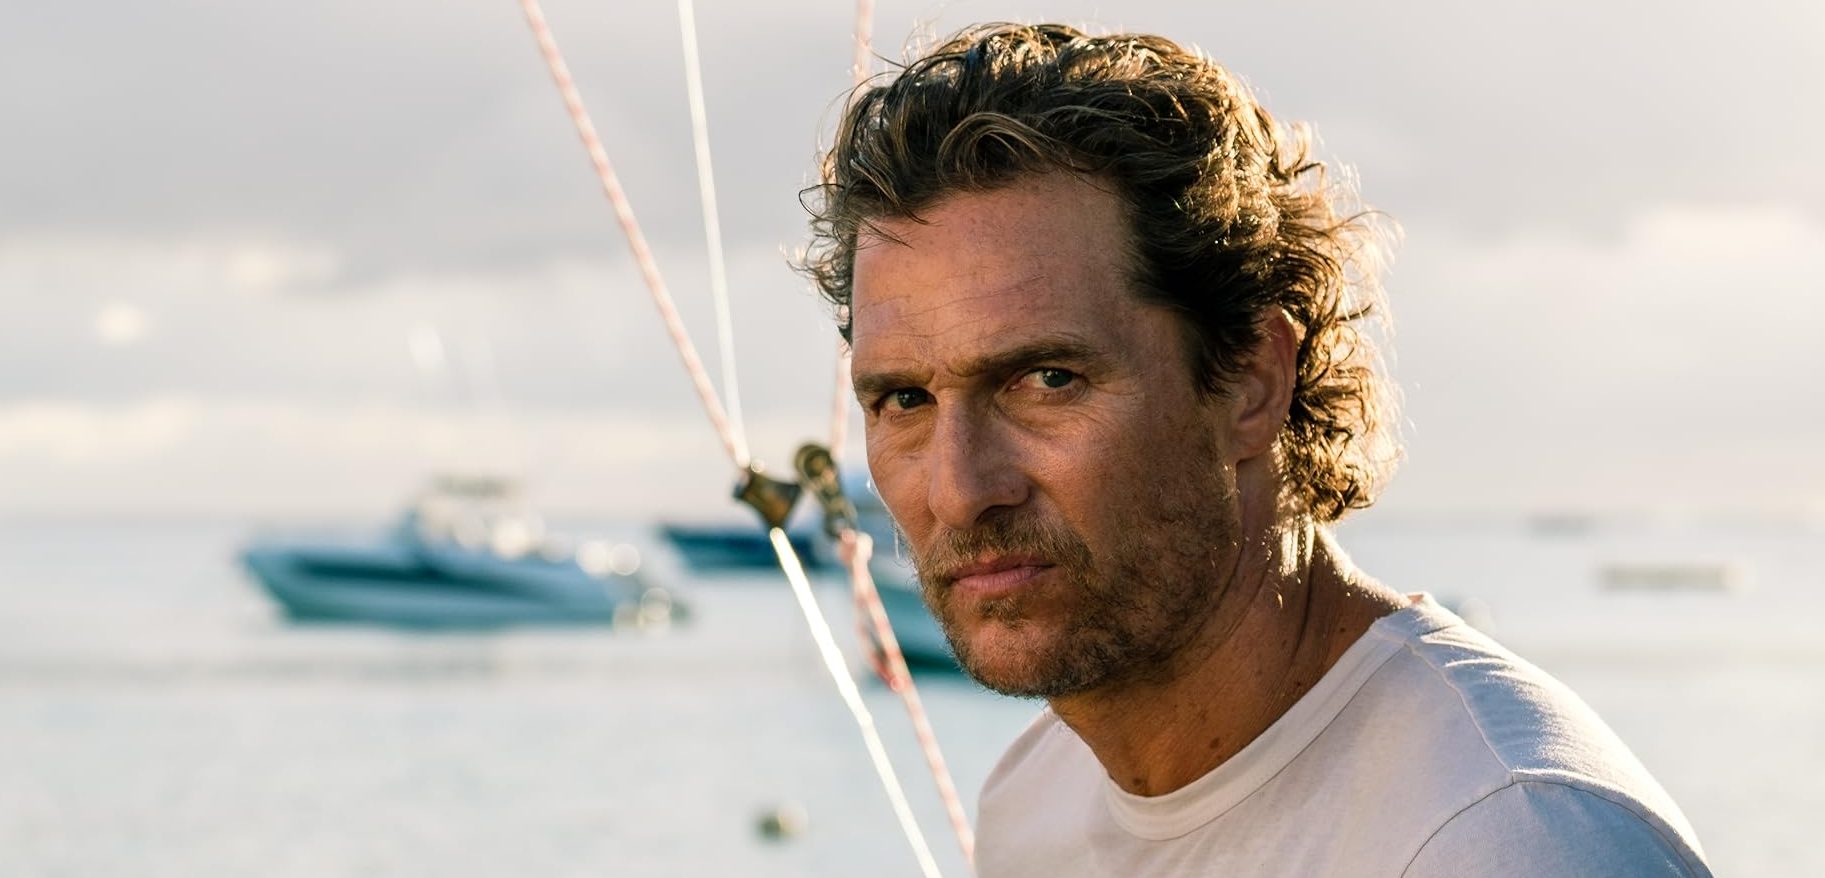 Matthew McConaughey’s The Lost Bus Starts Filming in New Mexico Next Month